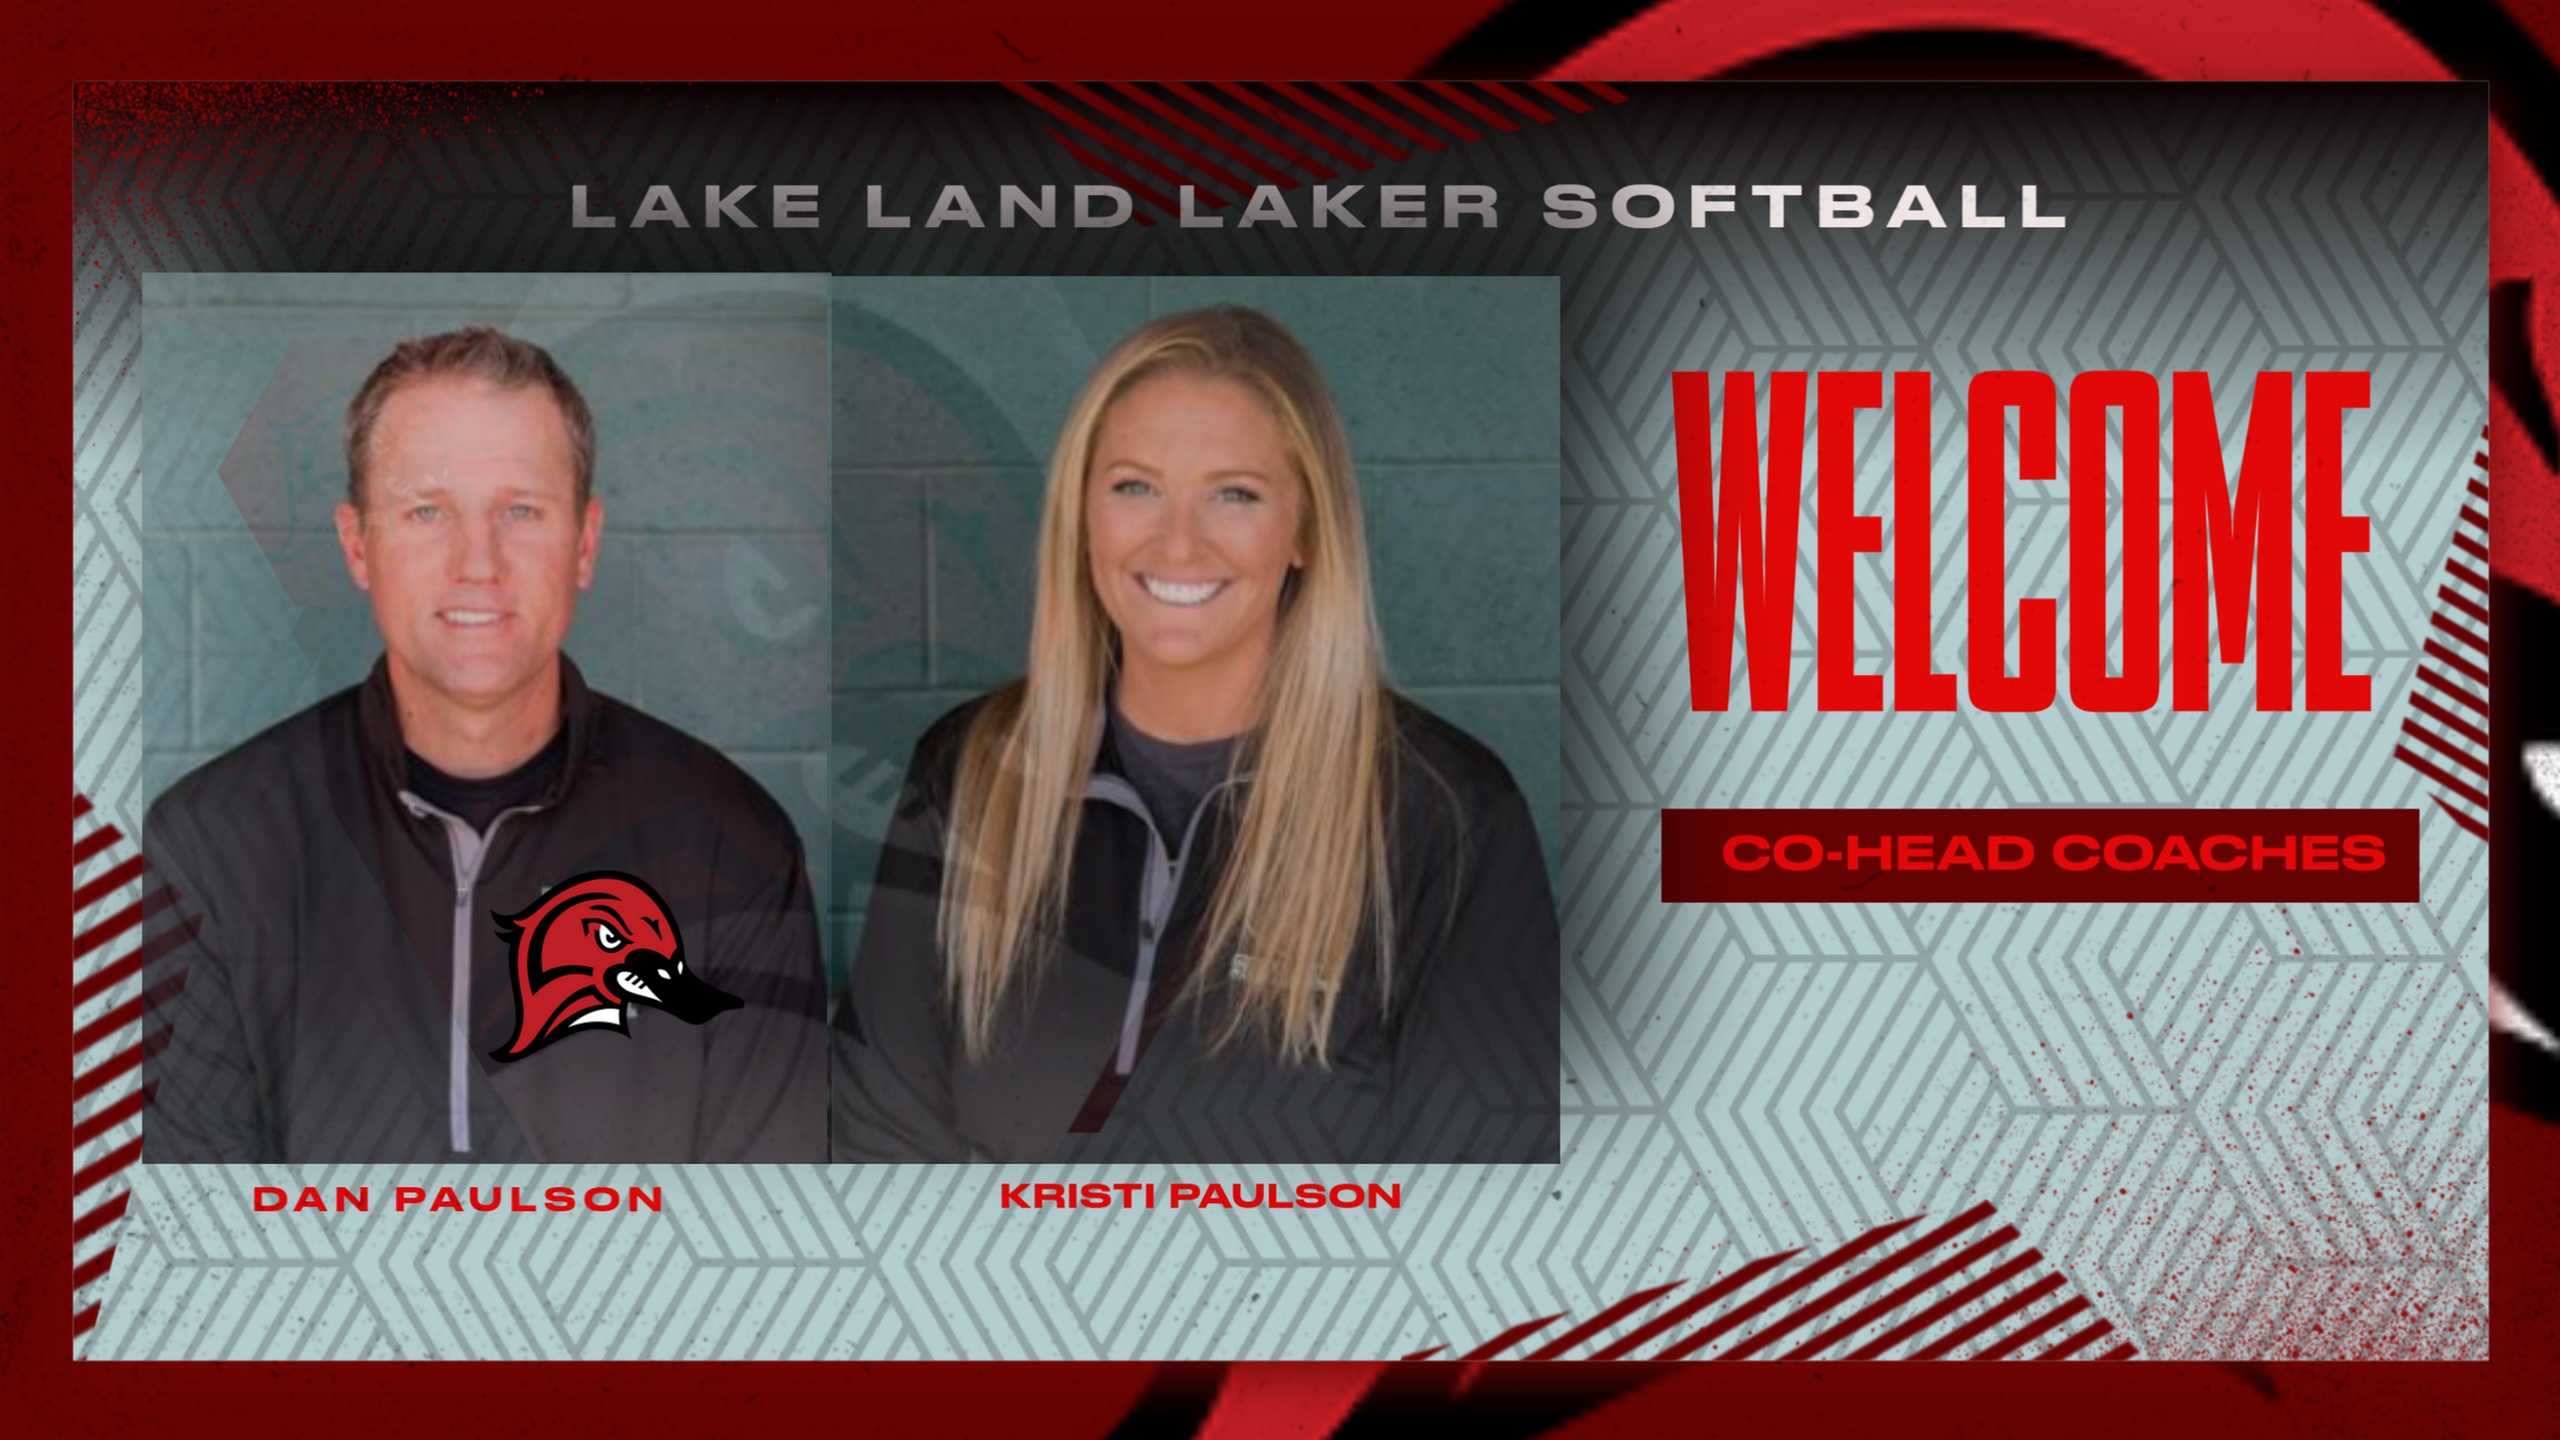 Laker Athletics is excited to welcome CO-Head Coaches Kristi and Dan Paulson